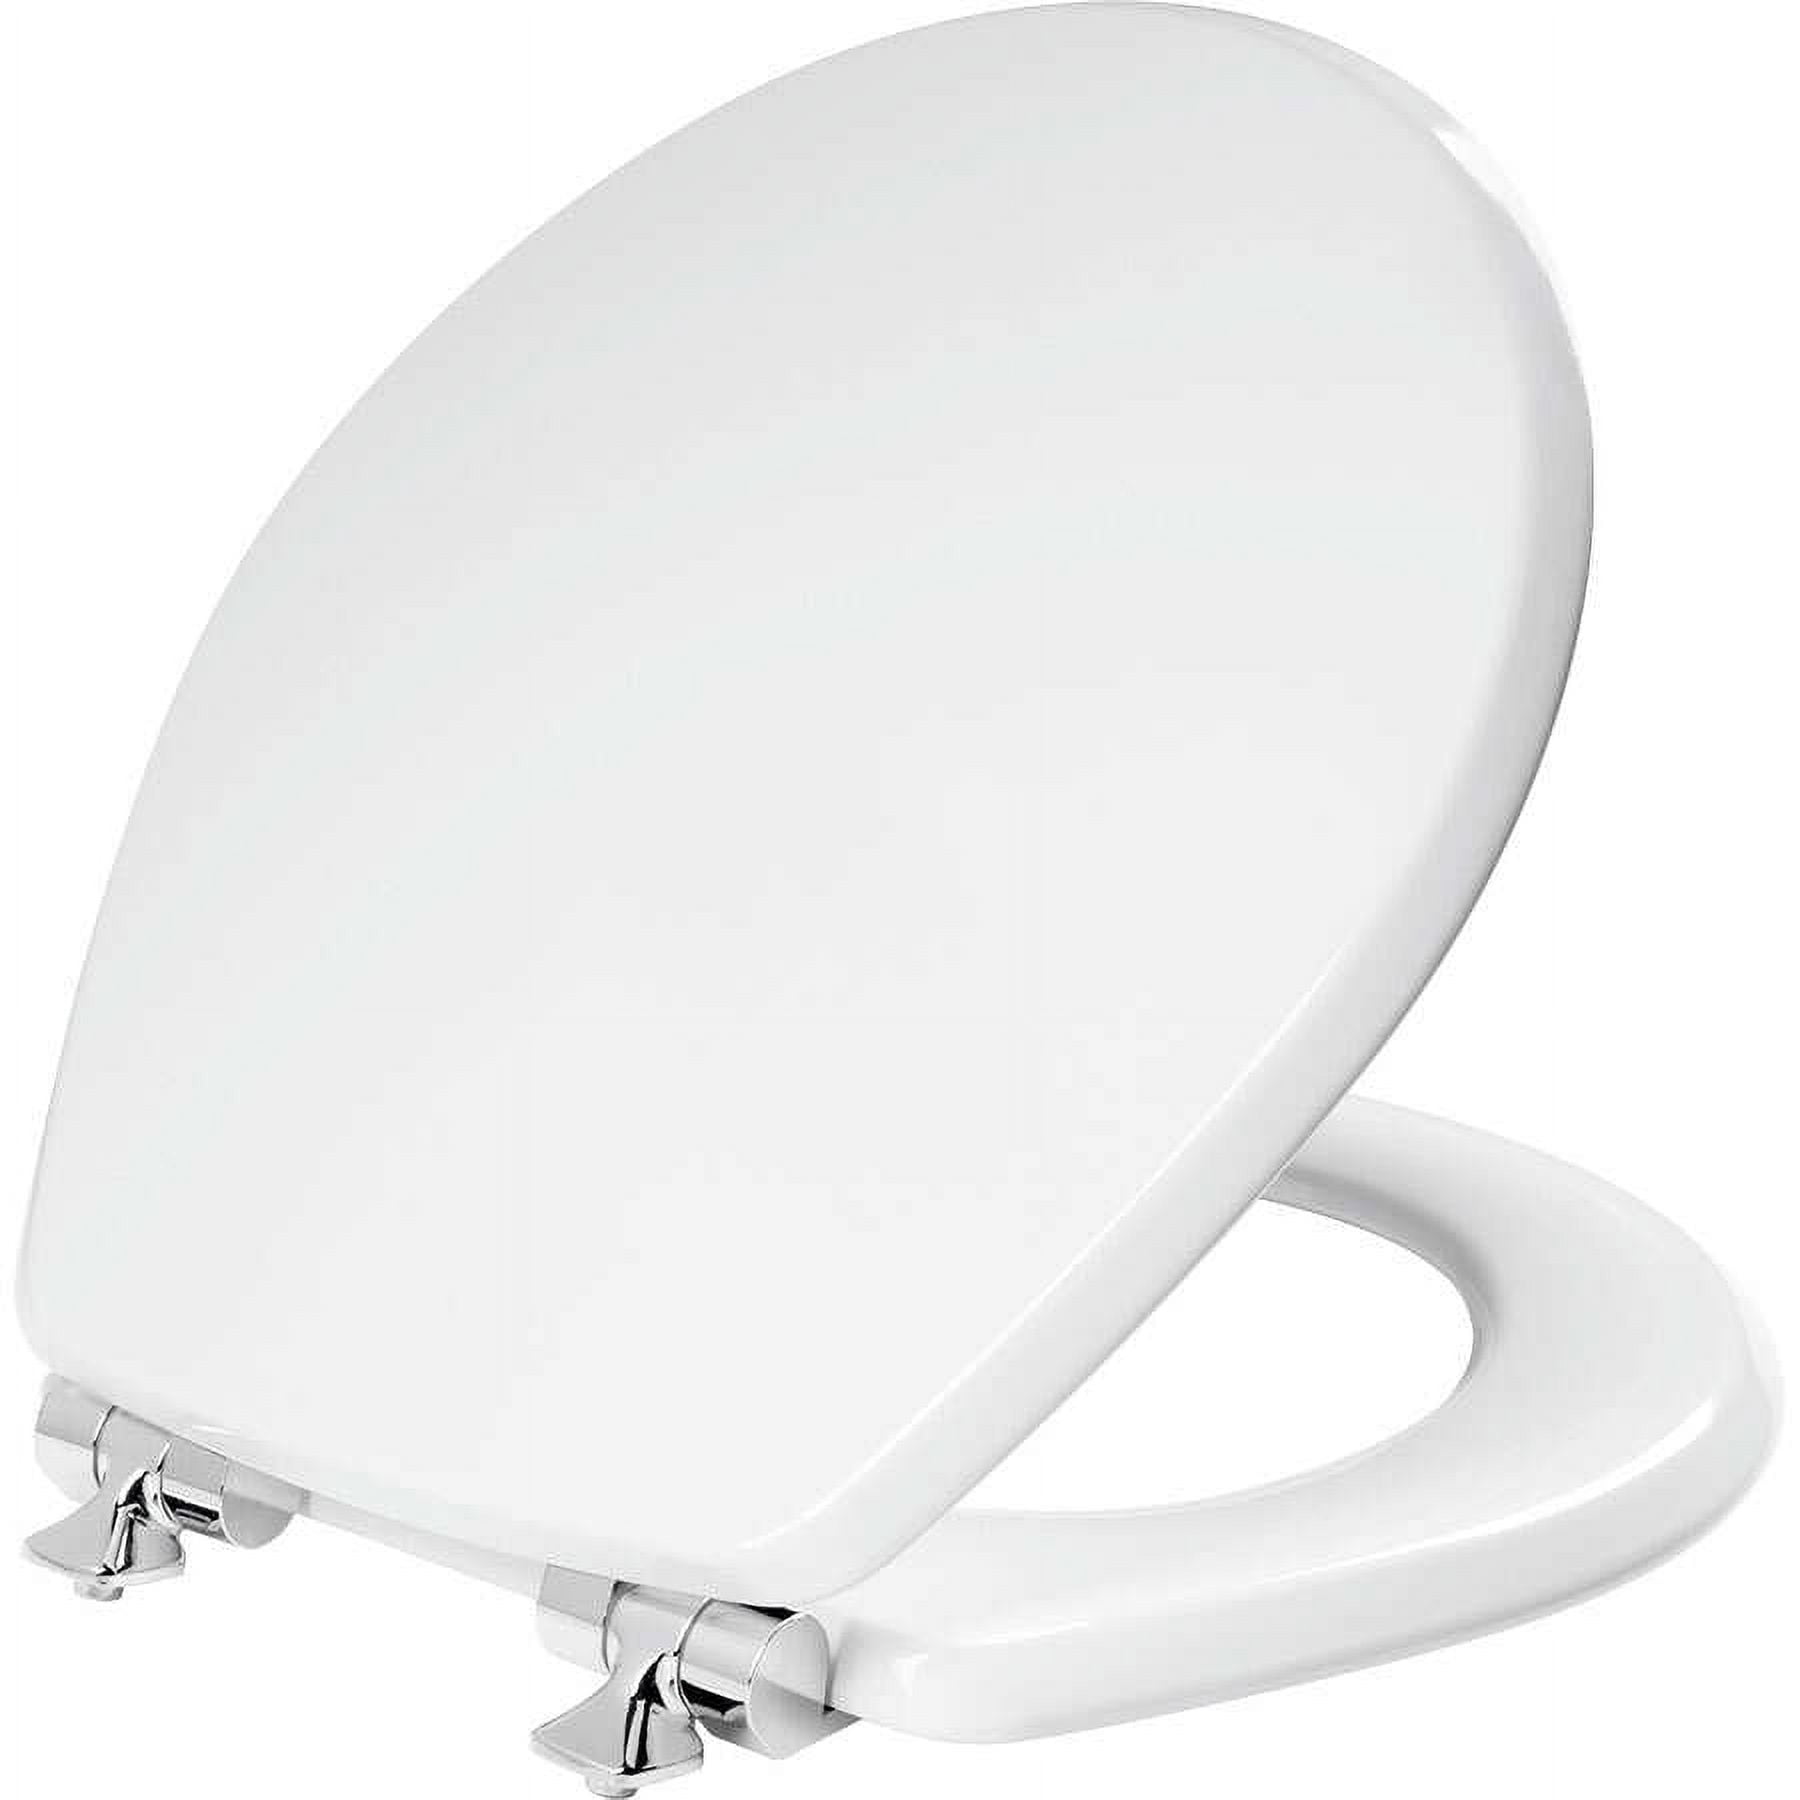 Picture of Mayfair 4000990 Slow Close Round White Molded Wood Toilet Seat